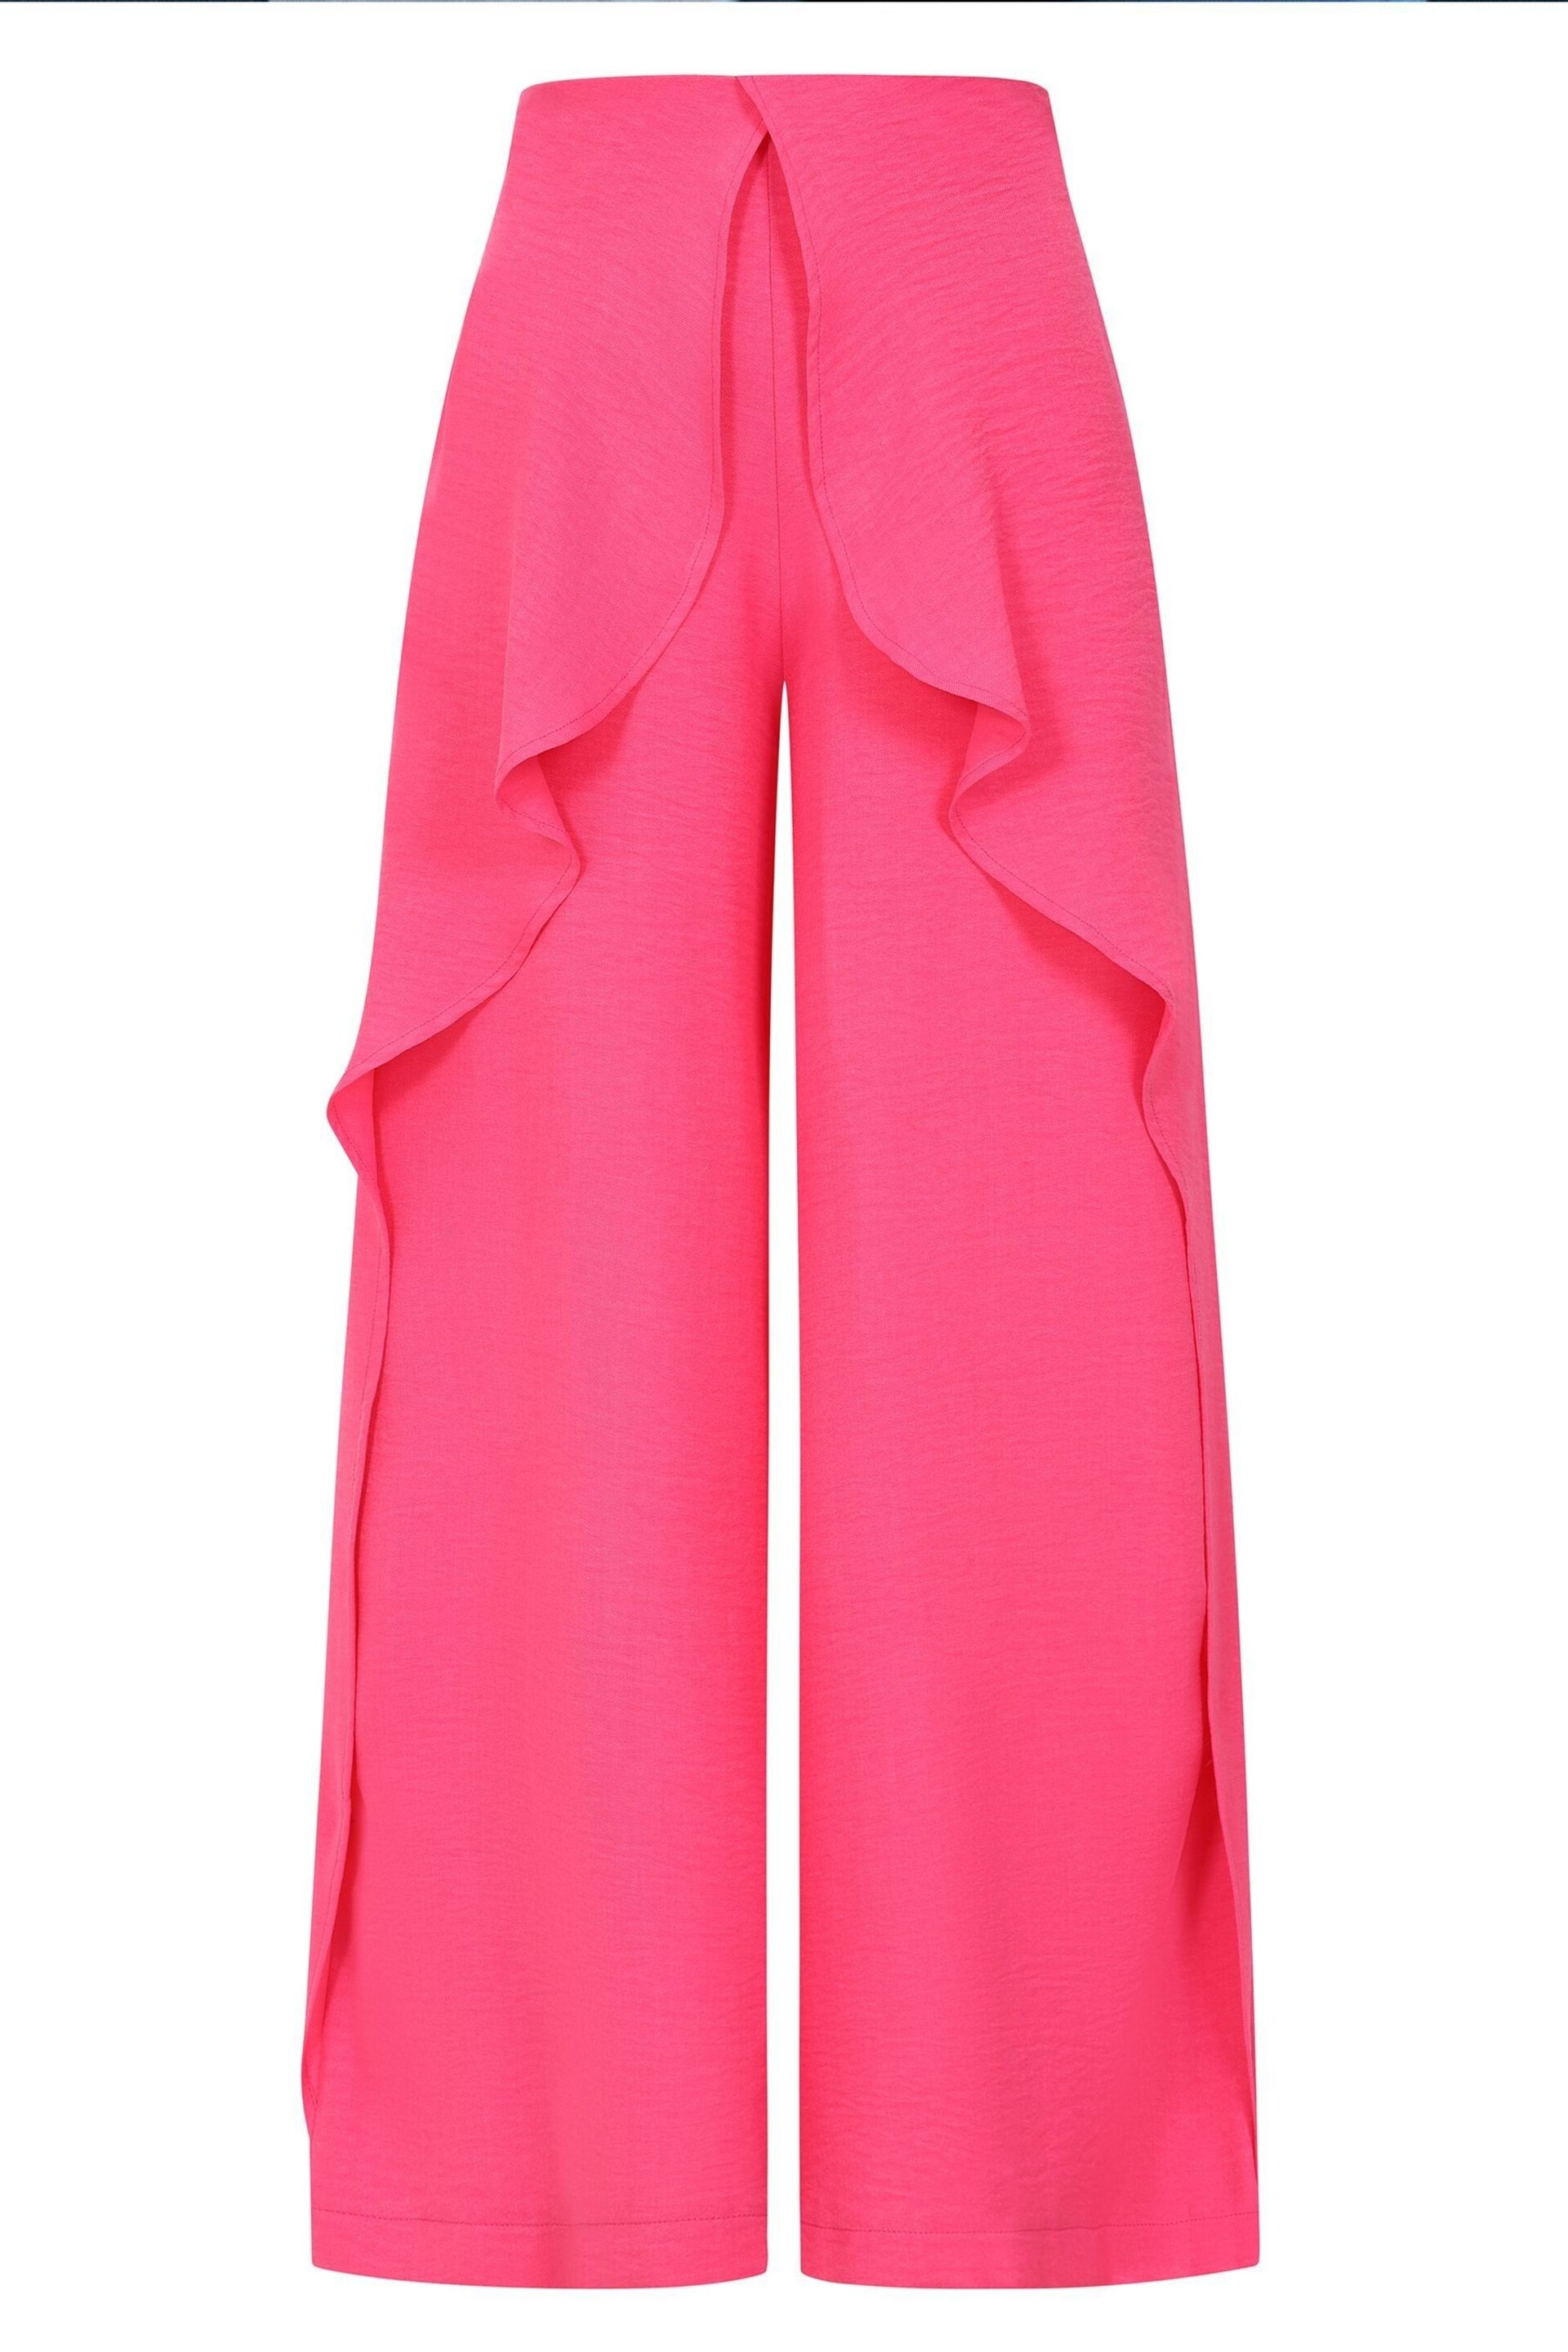 Hot Squash Pink Palazzo Joggers with Side Frill - Image 5 of 5